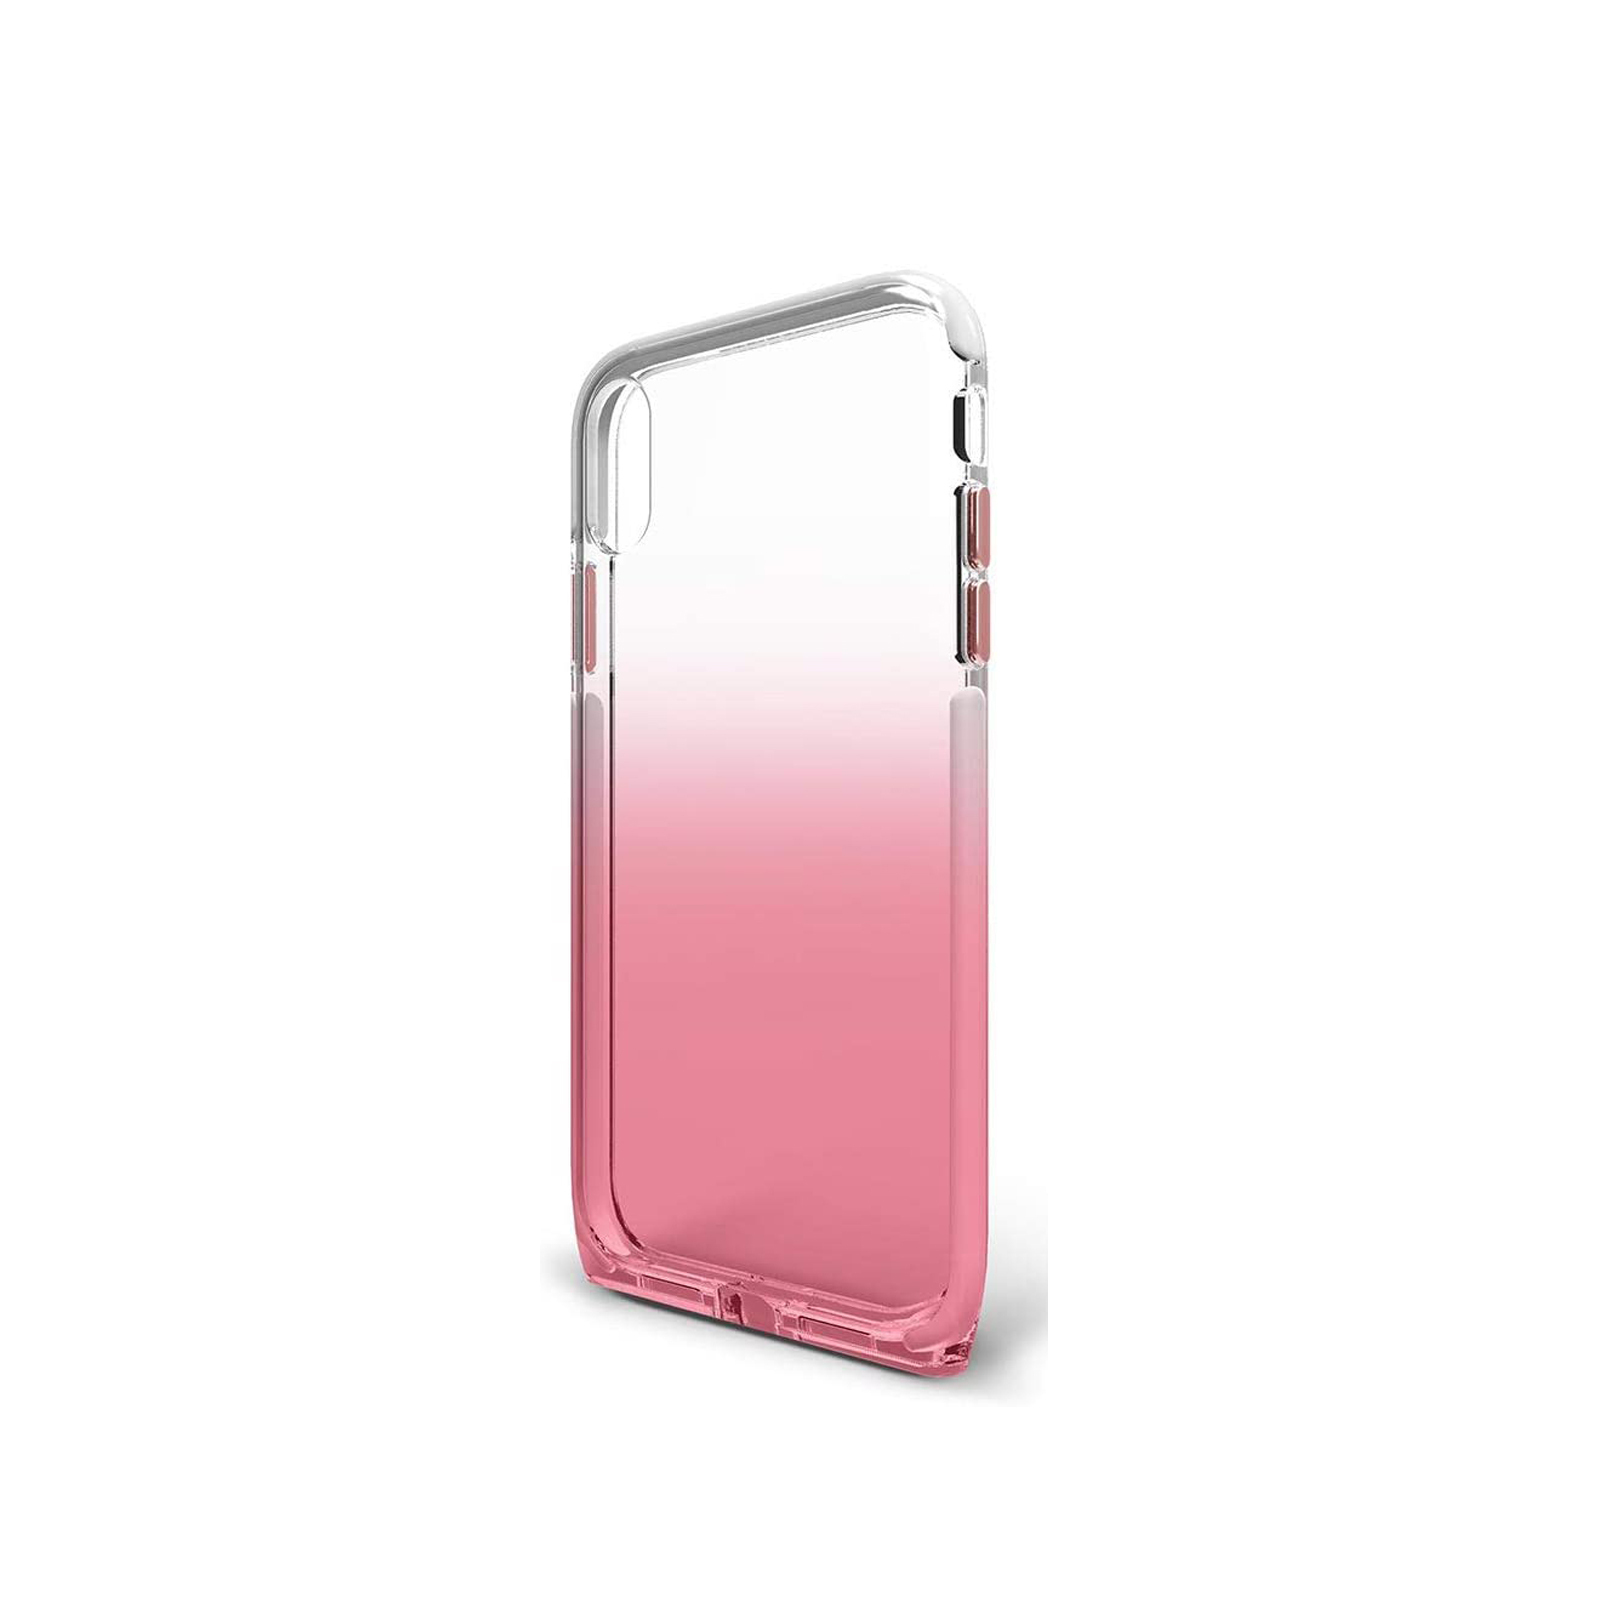 NLAHarmony iPhone XS Max Case [Clear / Rose]